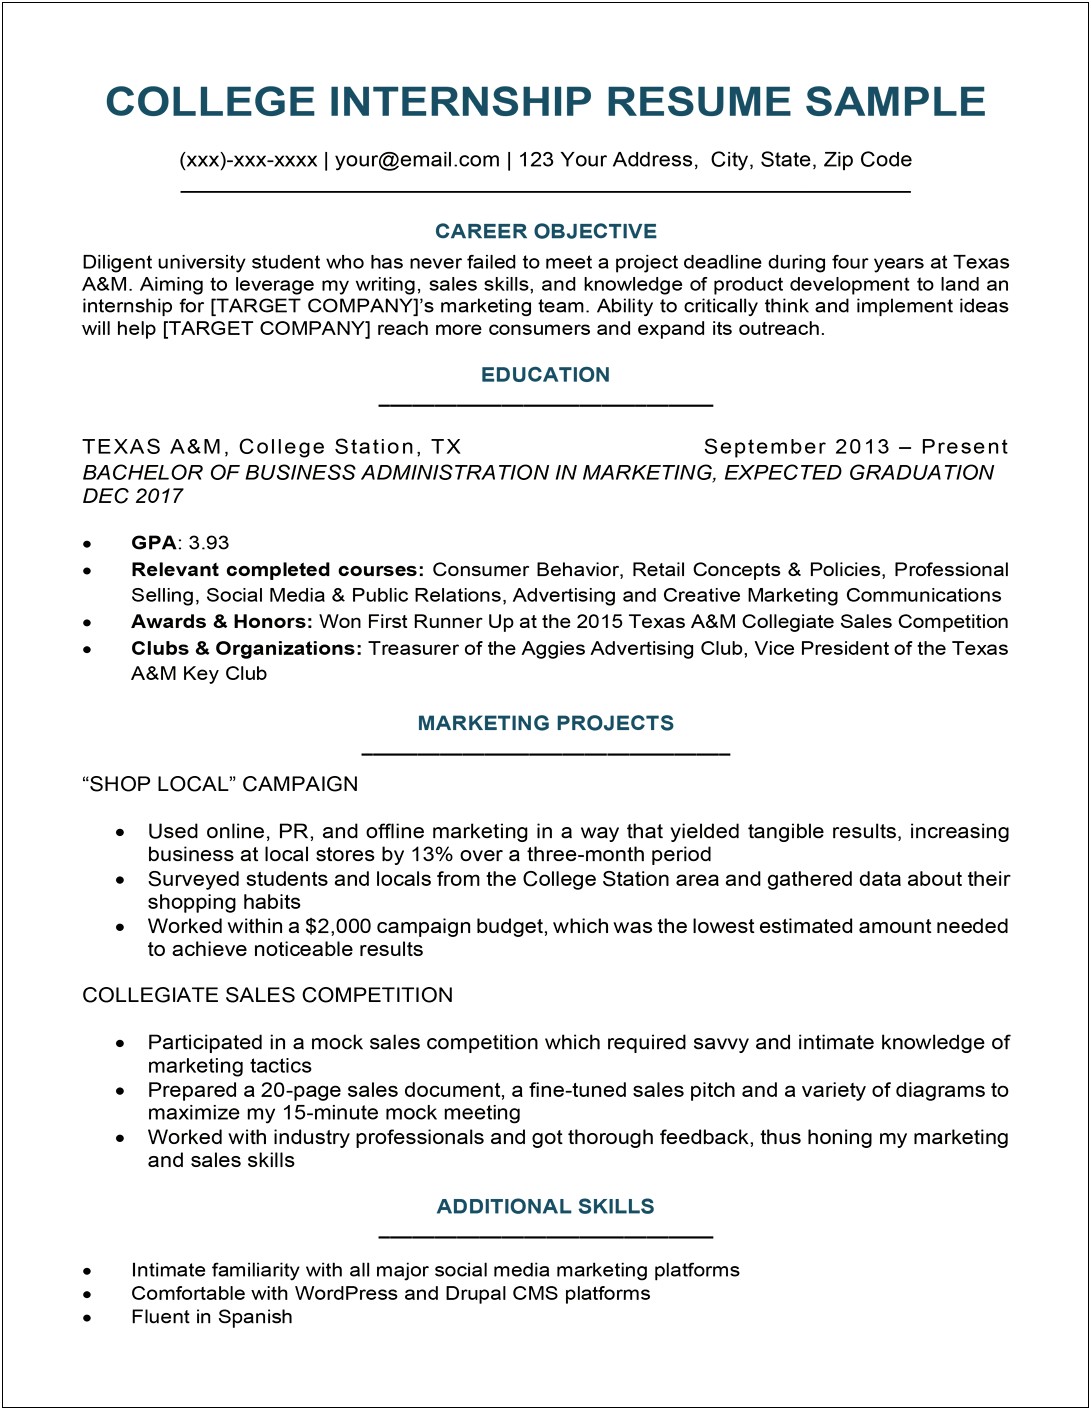 Sample Education Section Of A Resume